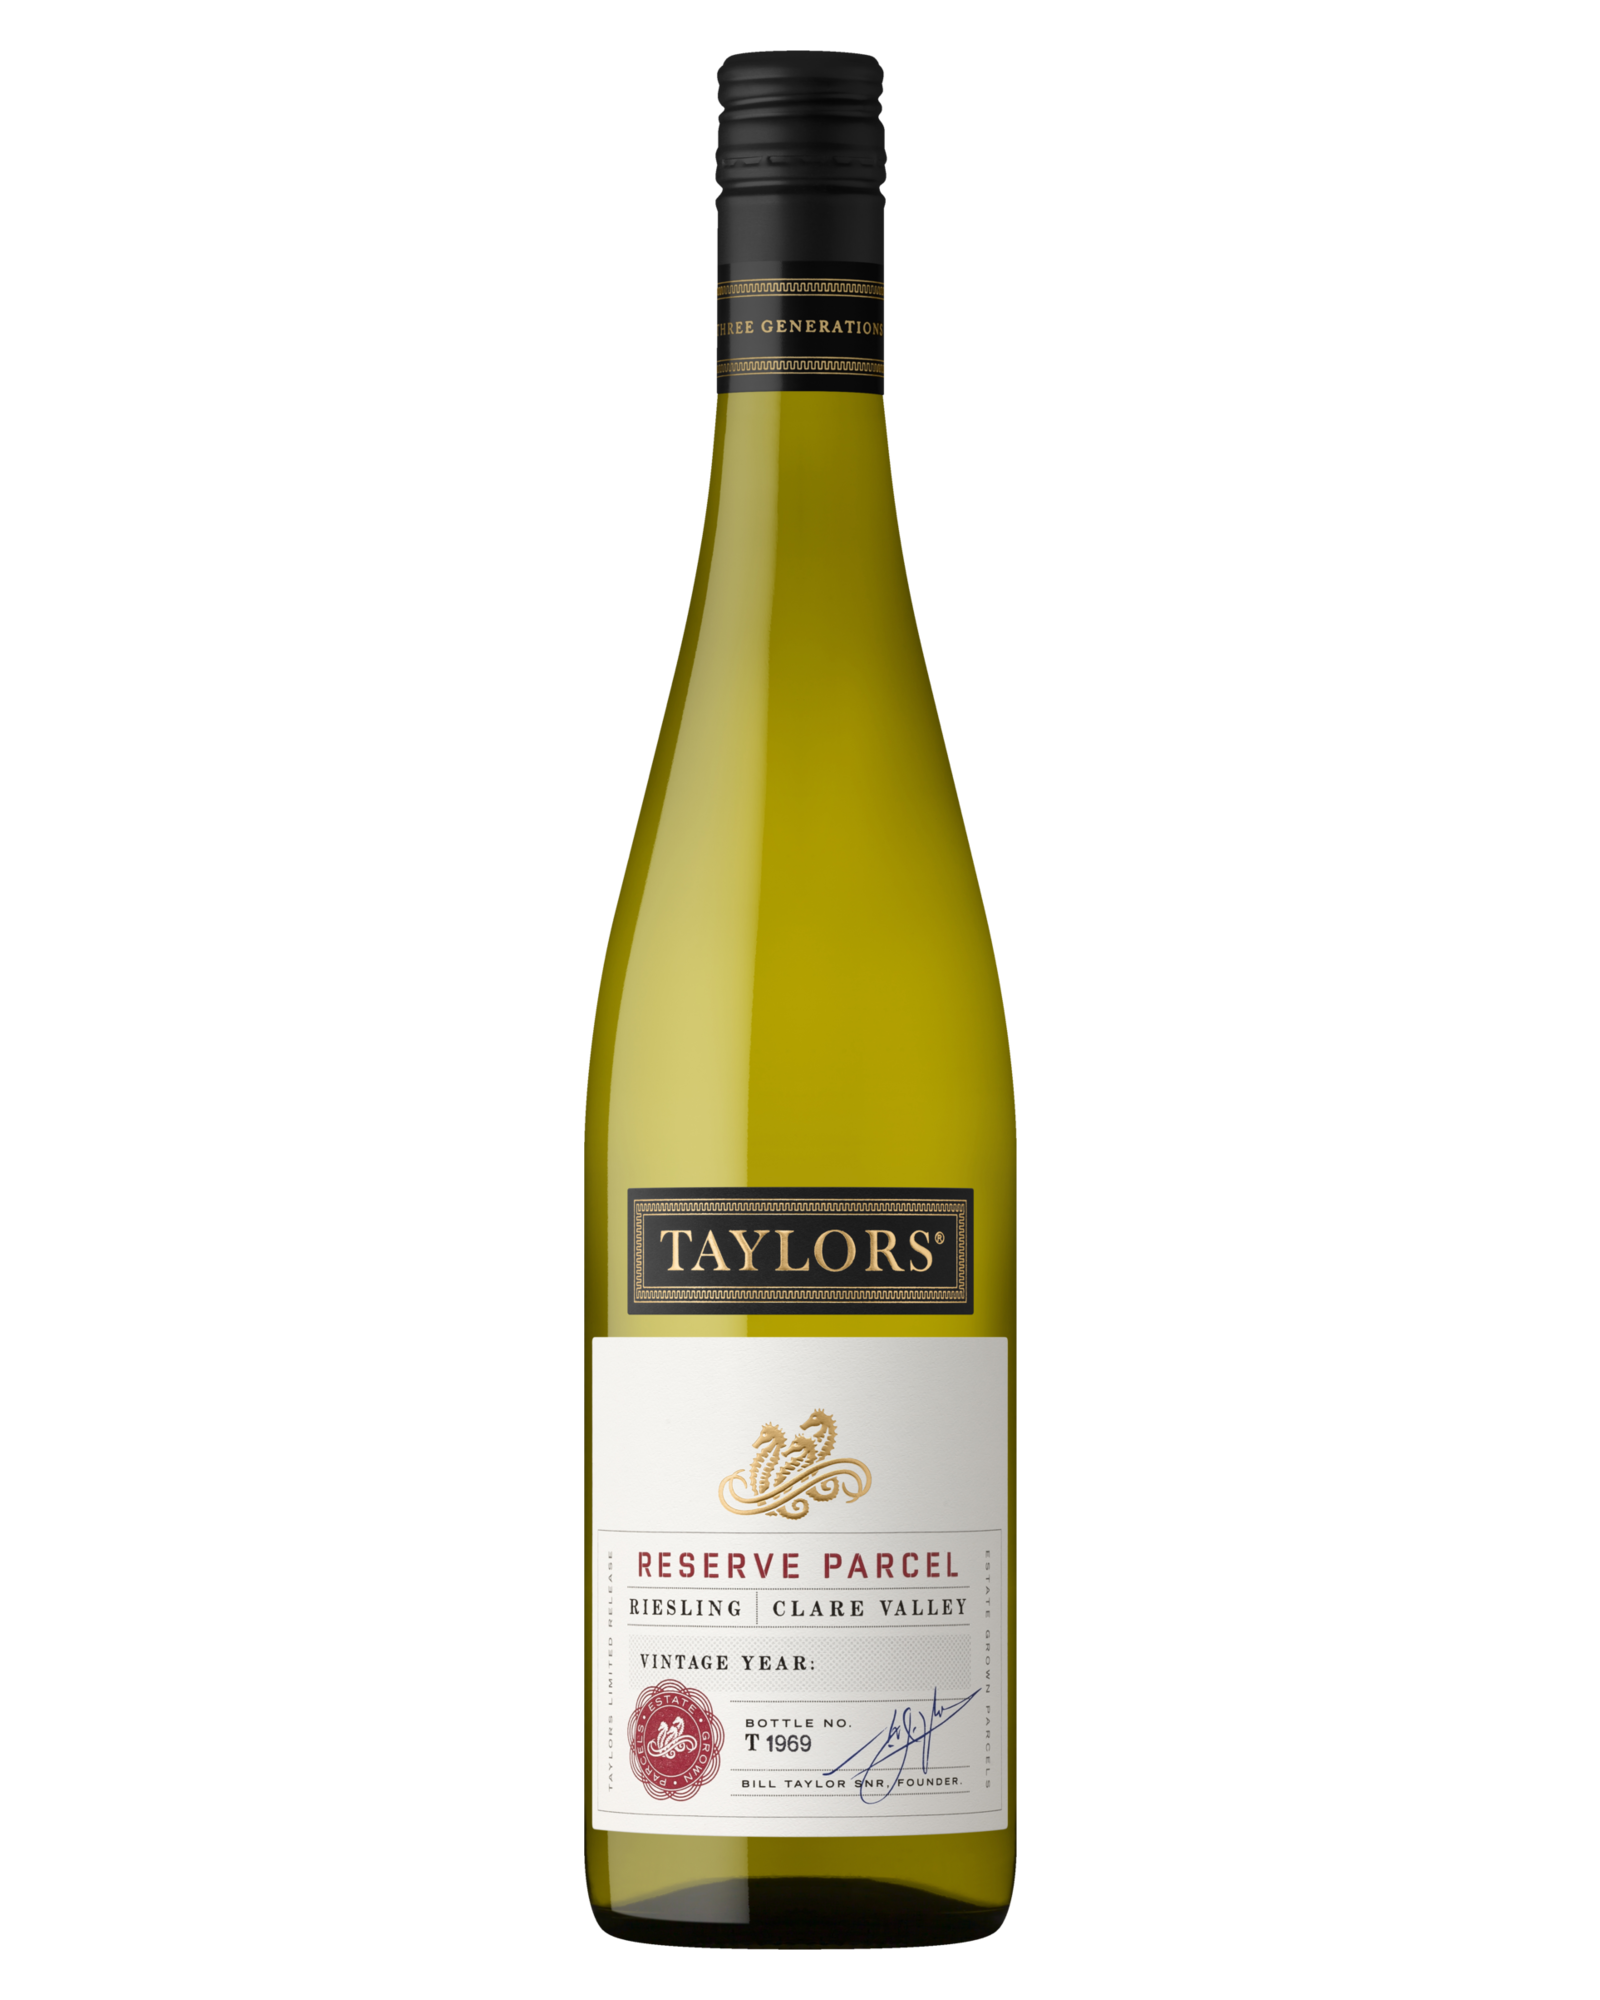 Taylors Reserve Parcel Riesling